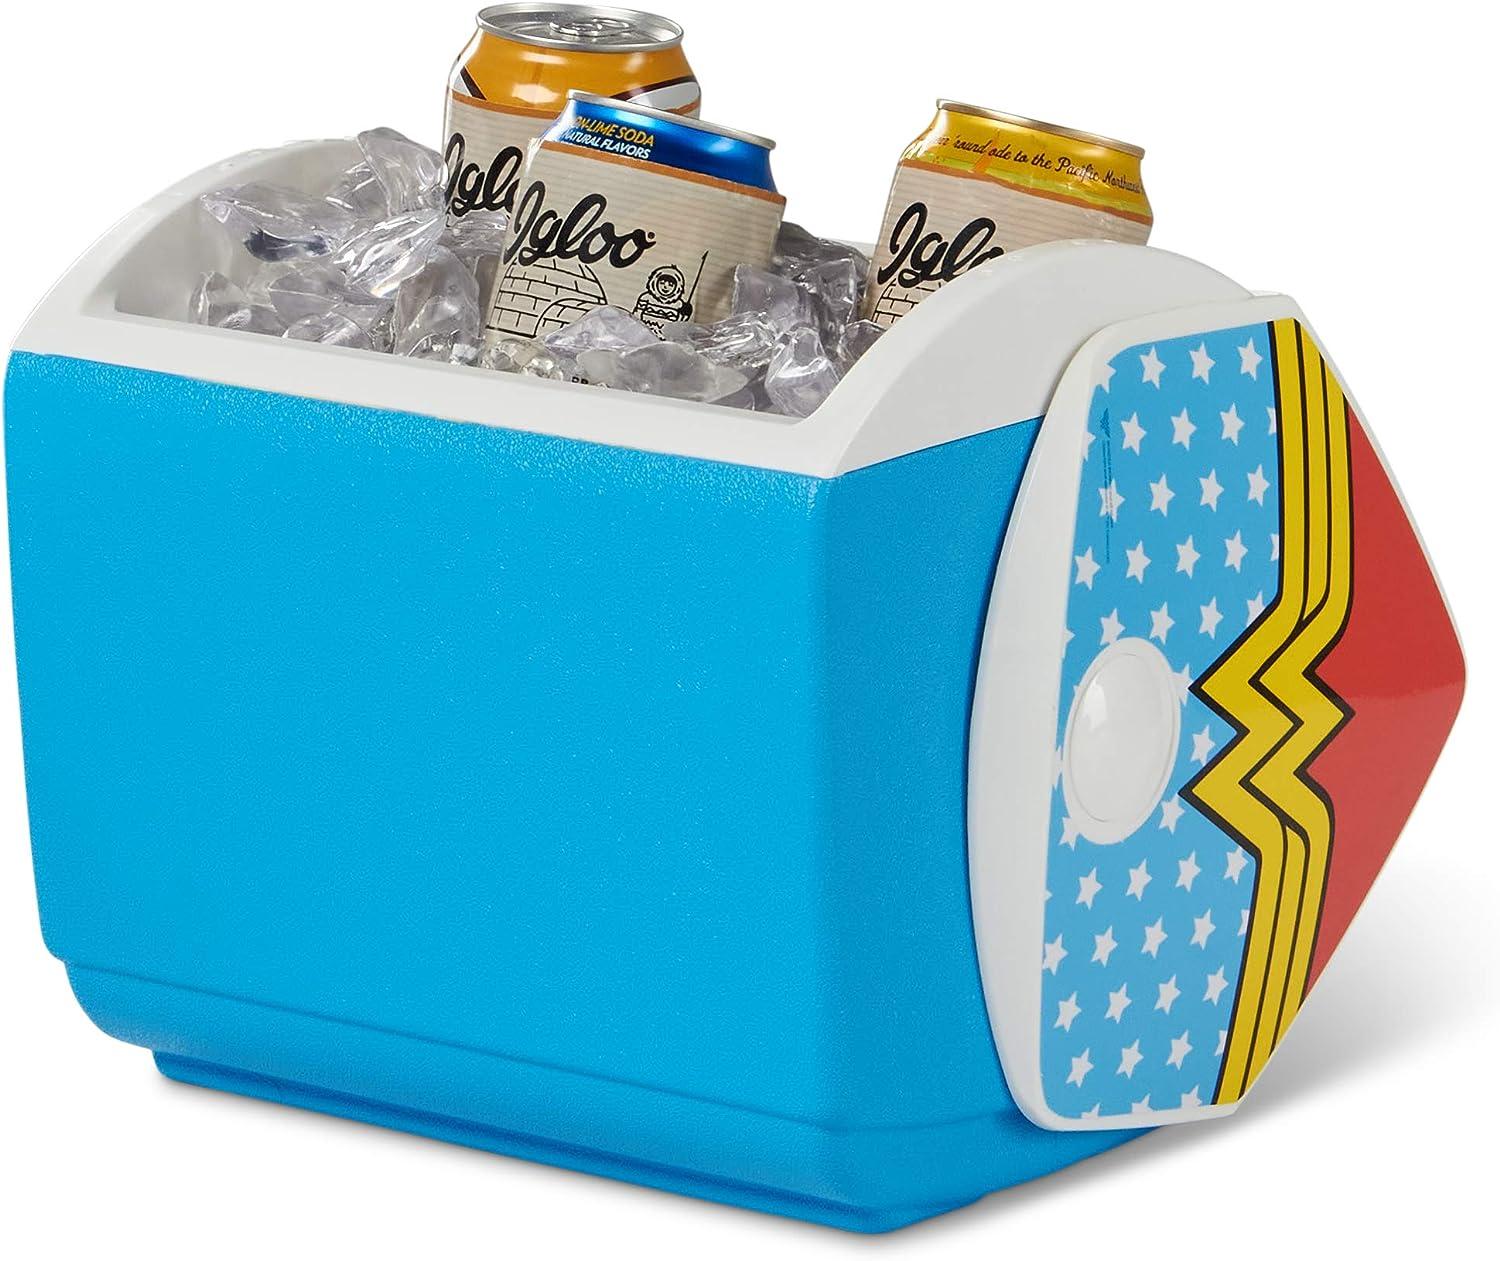 Igloo Limited Edition 7 Qt TV Show Decorated Playmate Lunch Box